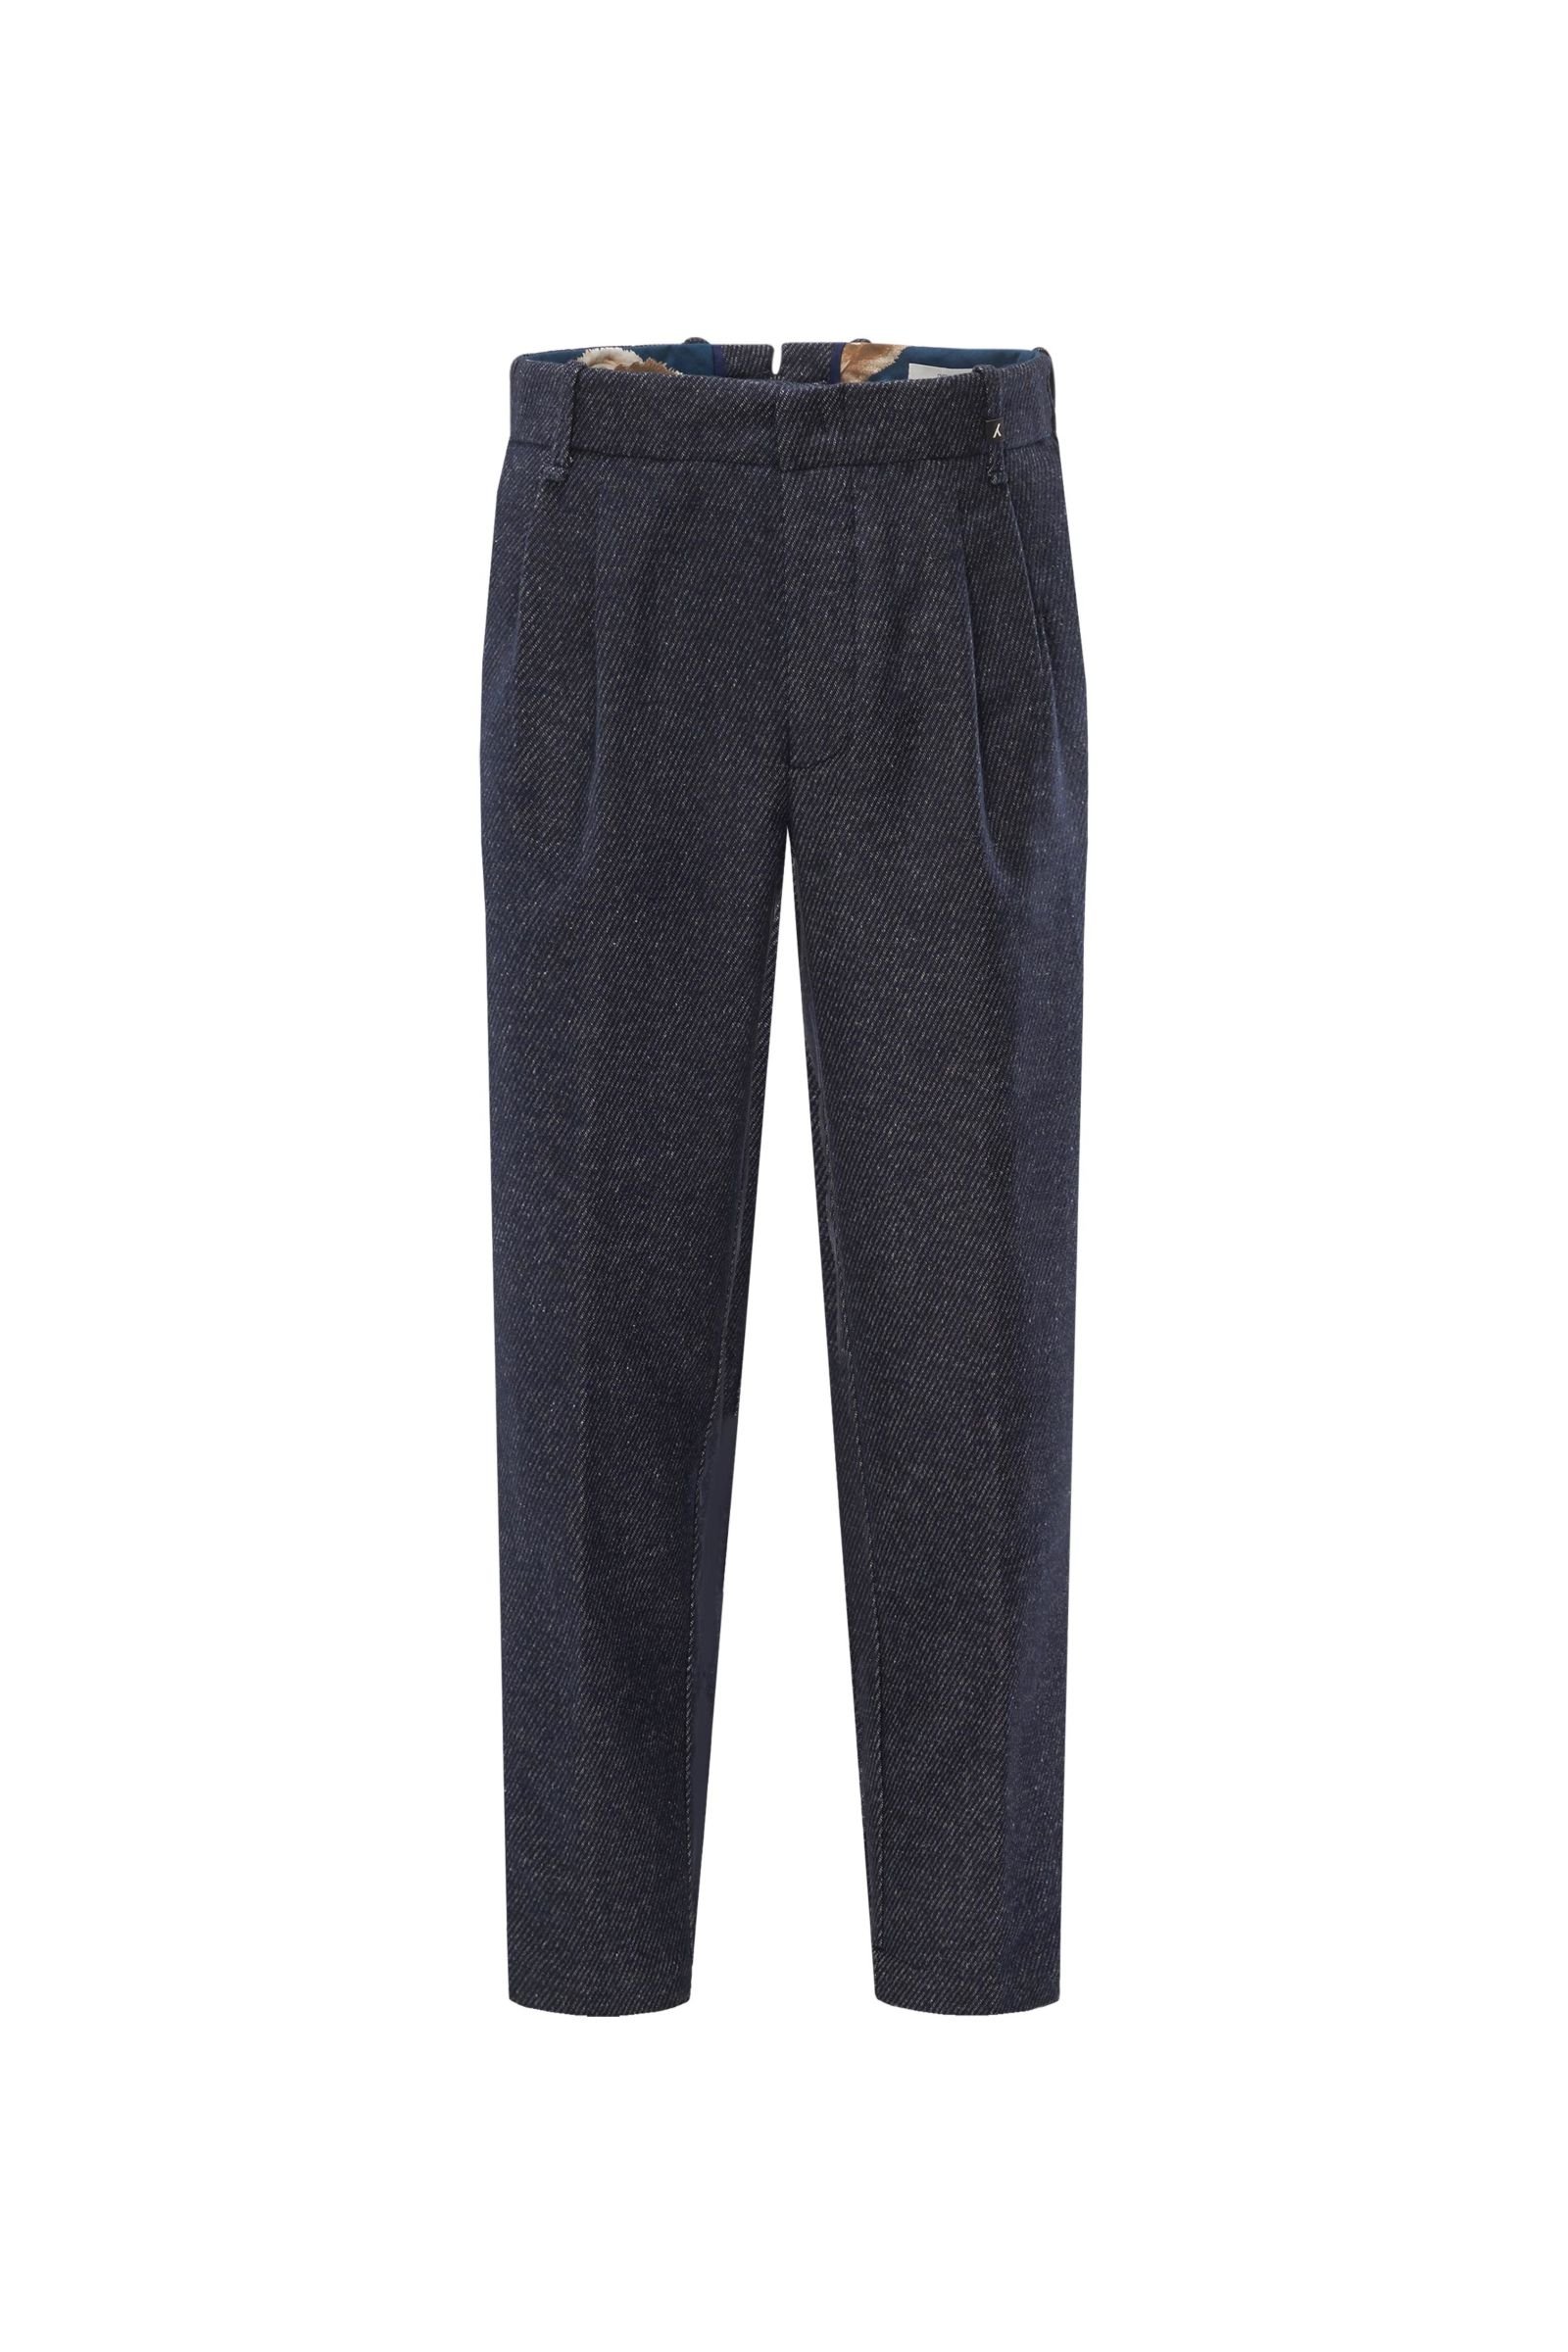 Trousers navy patterned